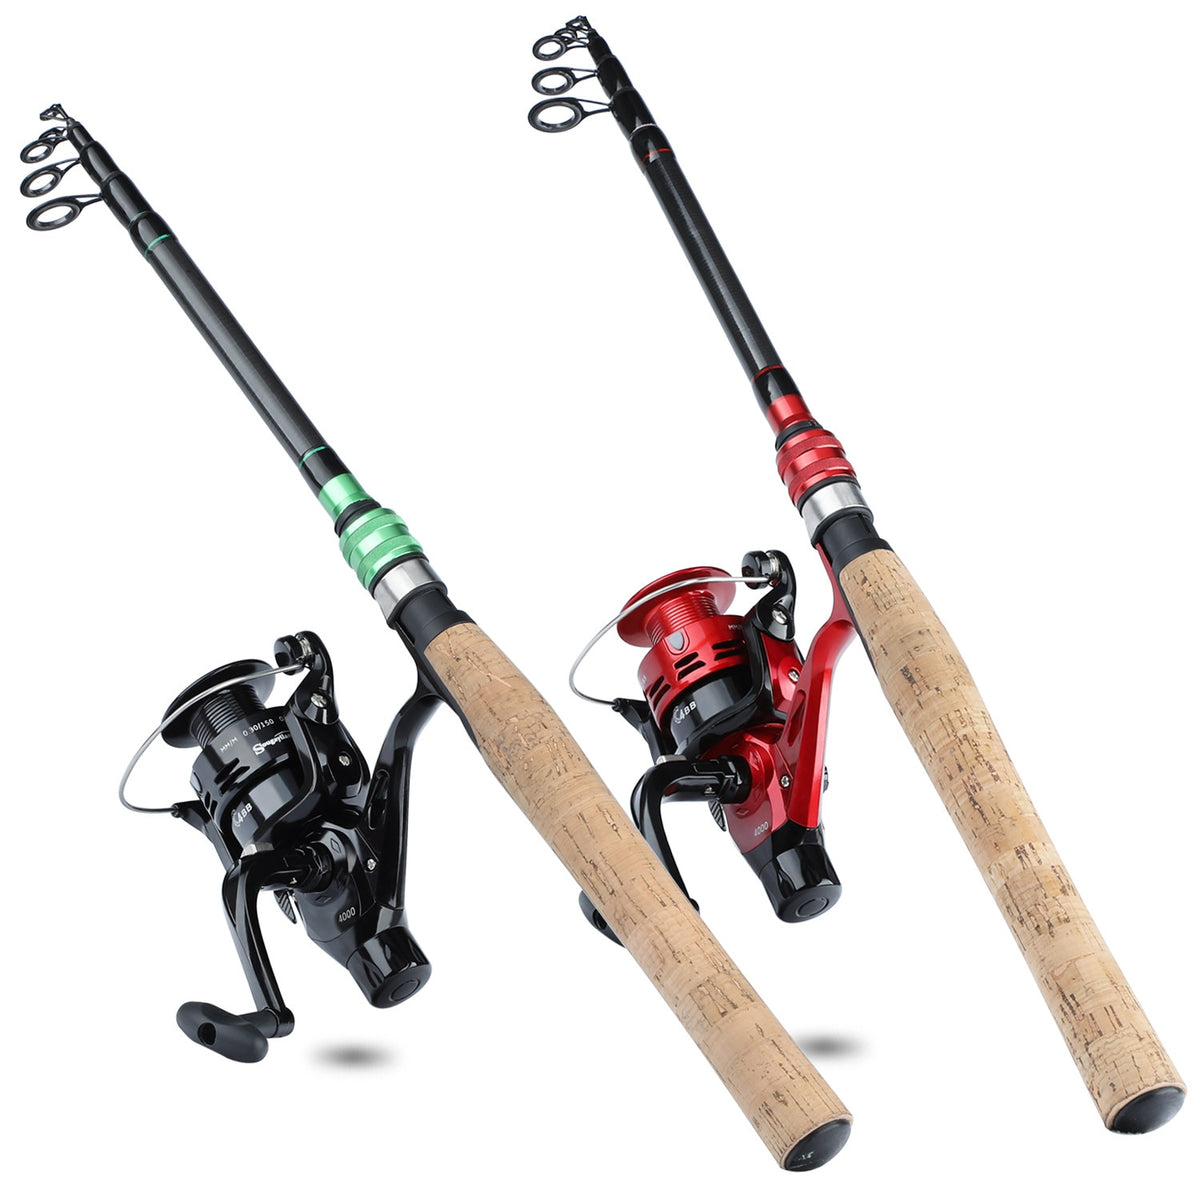 Sougayilang Telescopic Rod Set 1.8/2.4m Ultralight Reel With Line Lure  Hook, Full Kits For Fishing Ideal For Hooks And Lures From Ren06, $15.96